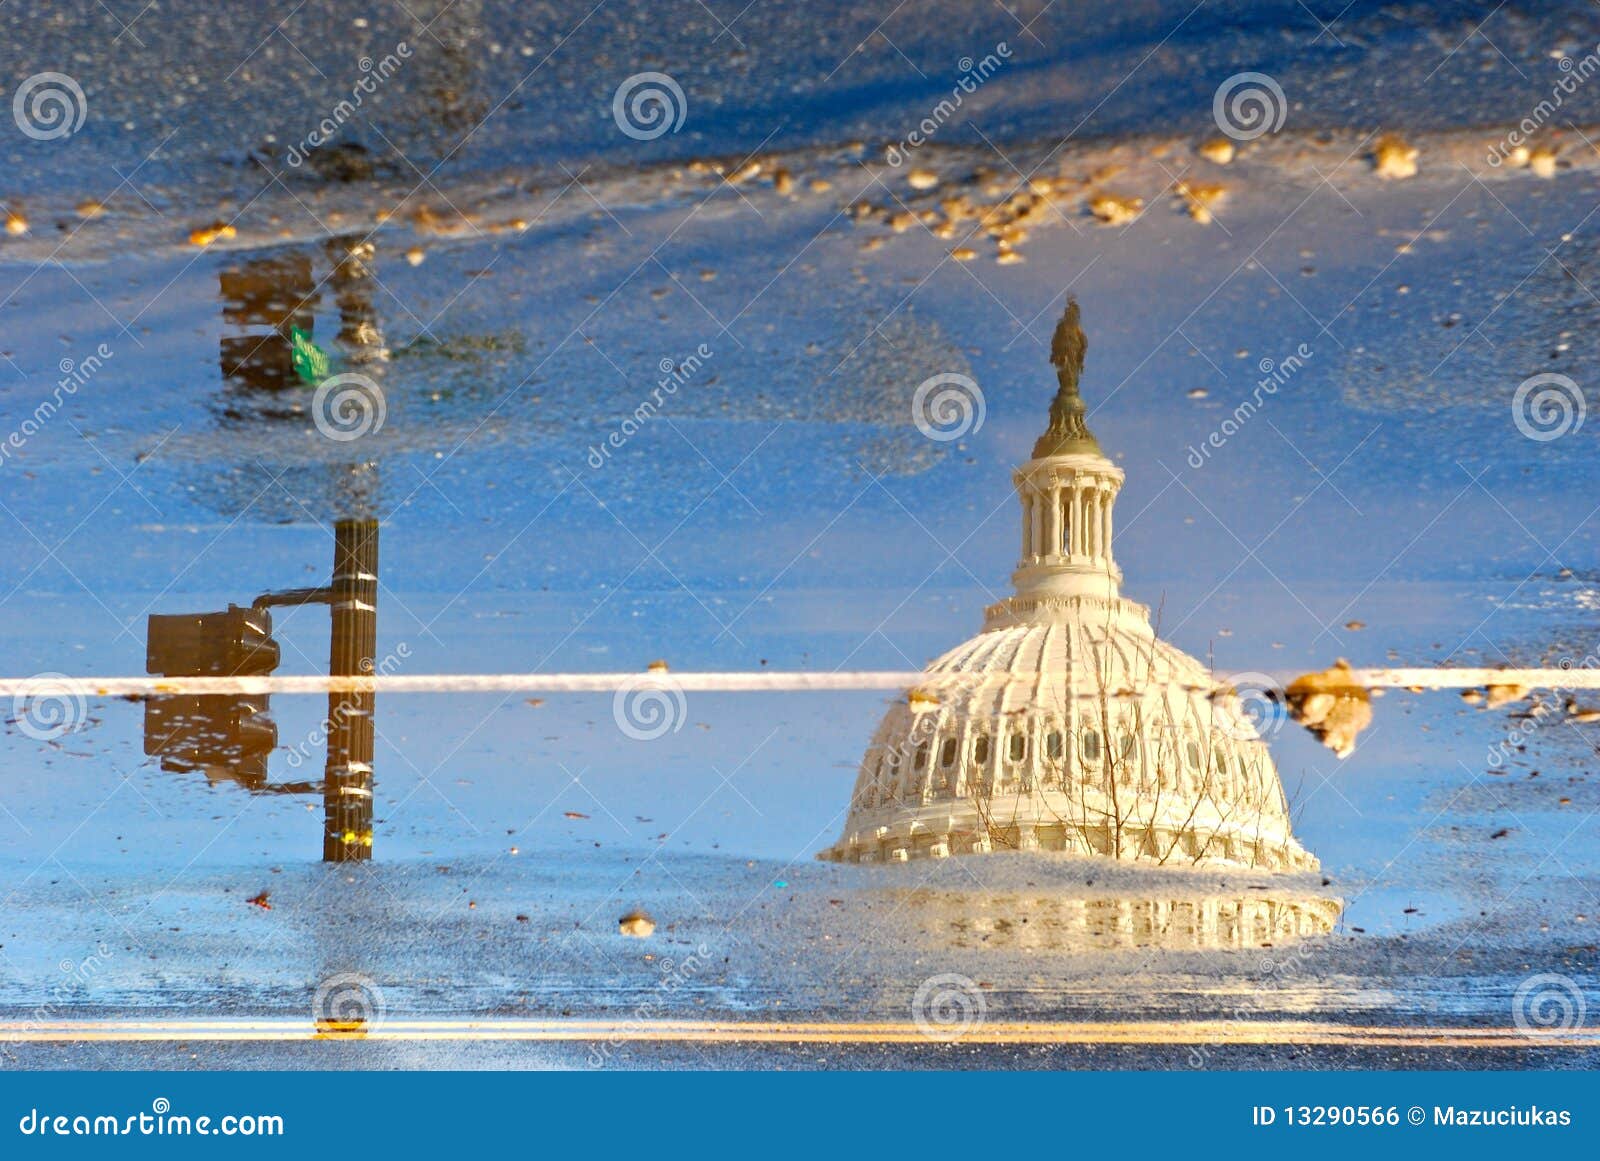 capitols reflection in winter time